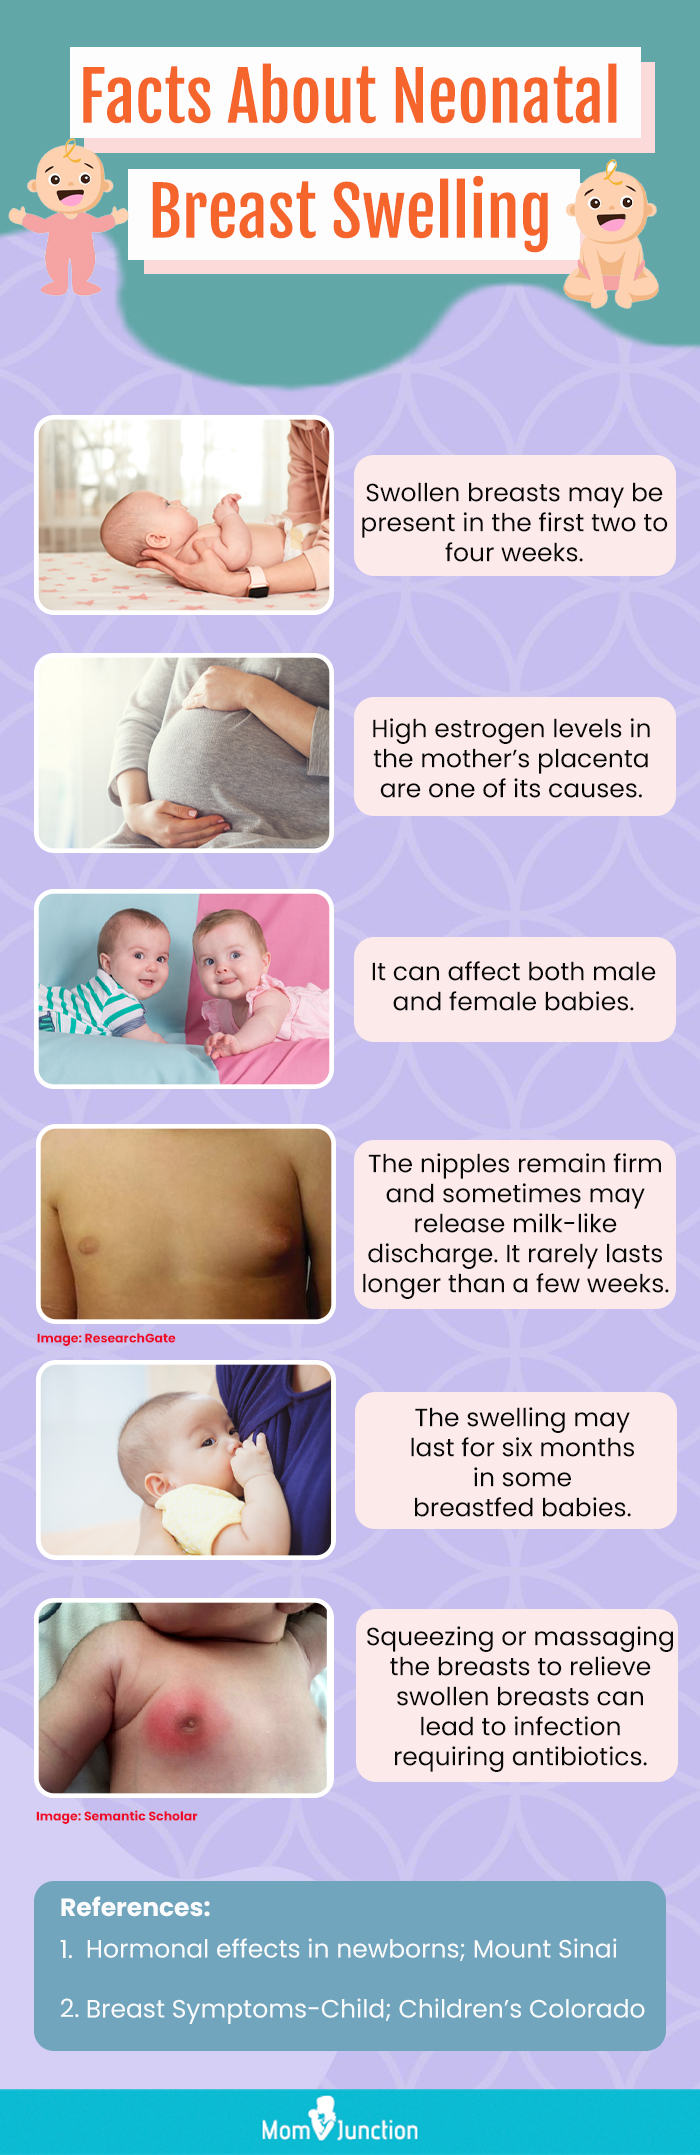 facts about neonatal breast swelling (infographic)